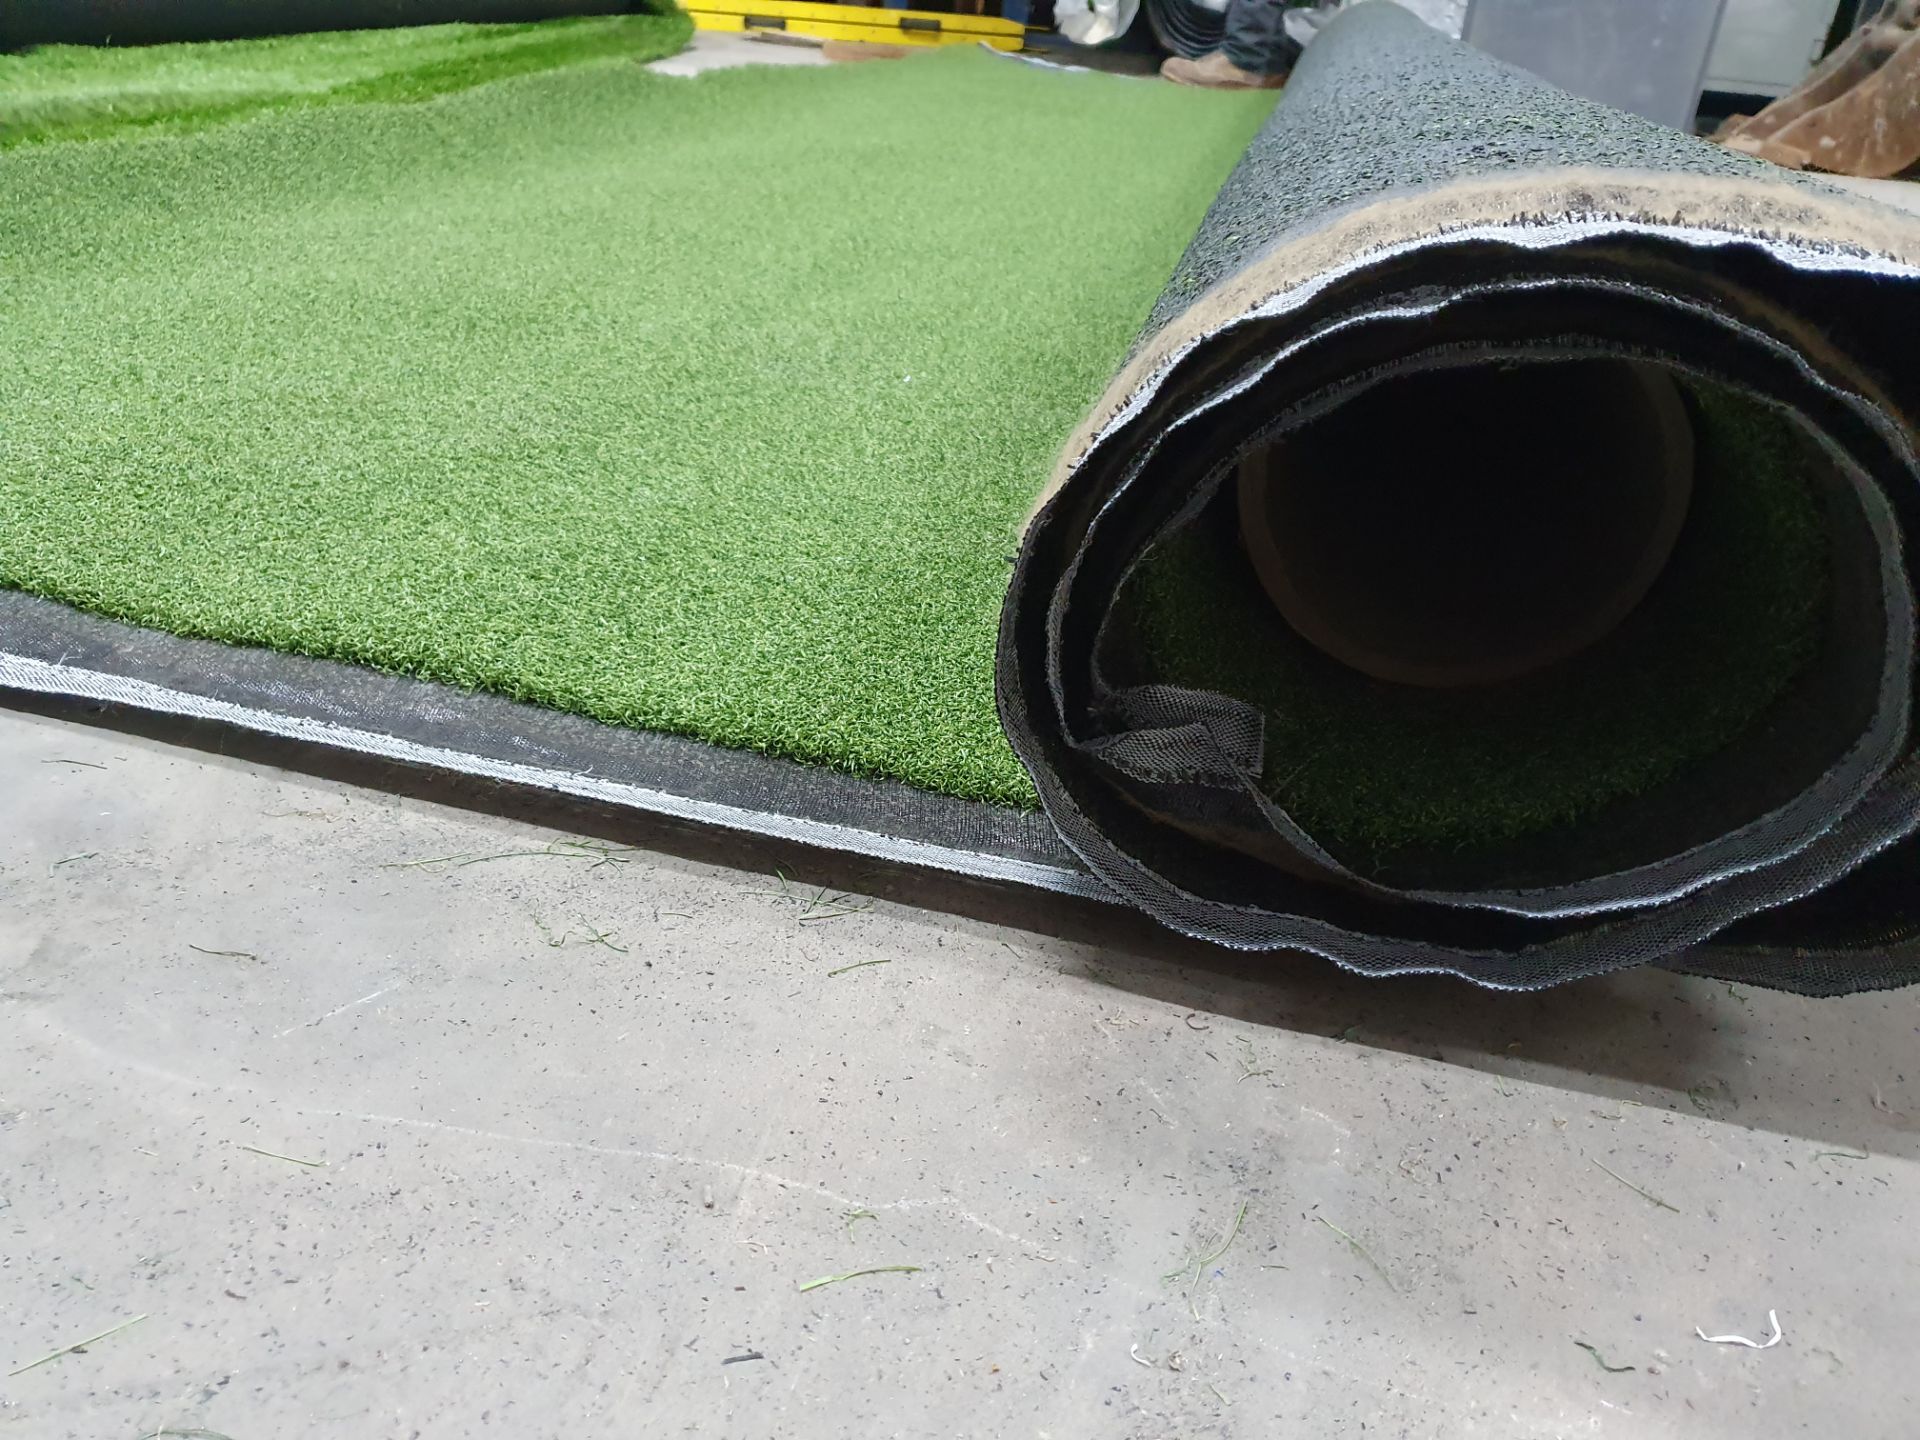 Roll of Green Artificial Grass | Approximate size: 4m x 4m